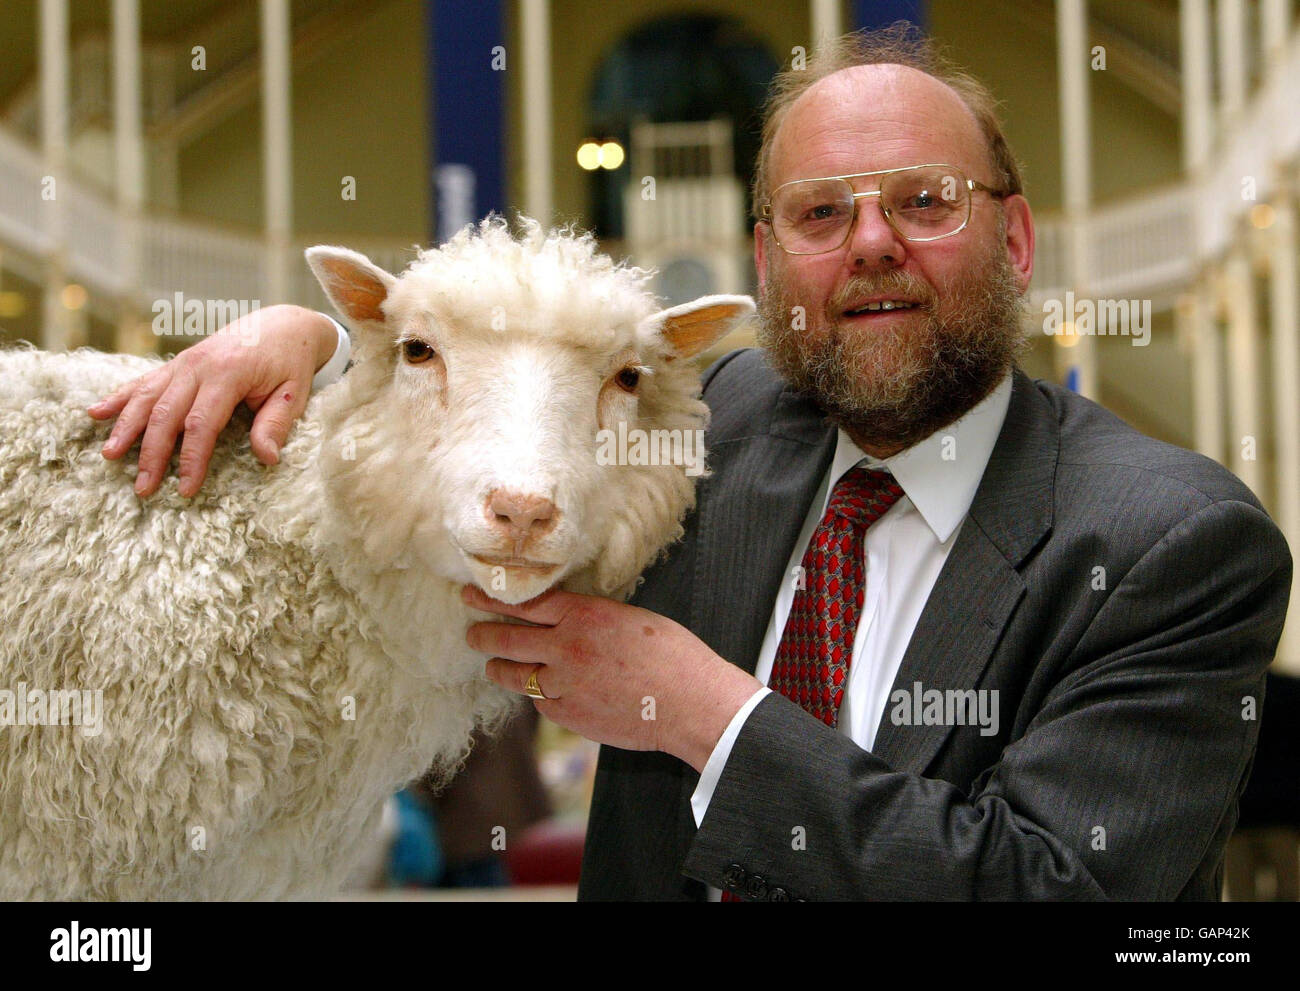 Undated file photo of Professor Ian Wilmut of the Roslin Institute with Dolly the Sheep, as stem cell research might be 20 years behind where it is today if Dolly the Sheep had never been born, according to the scientist whose team created the world's first mammal cloned from an adult cell. Stock Photo